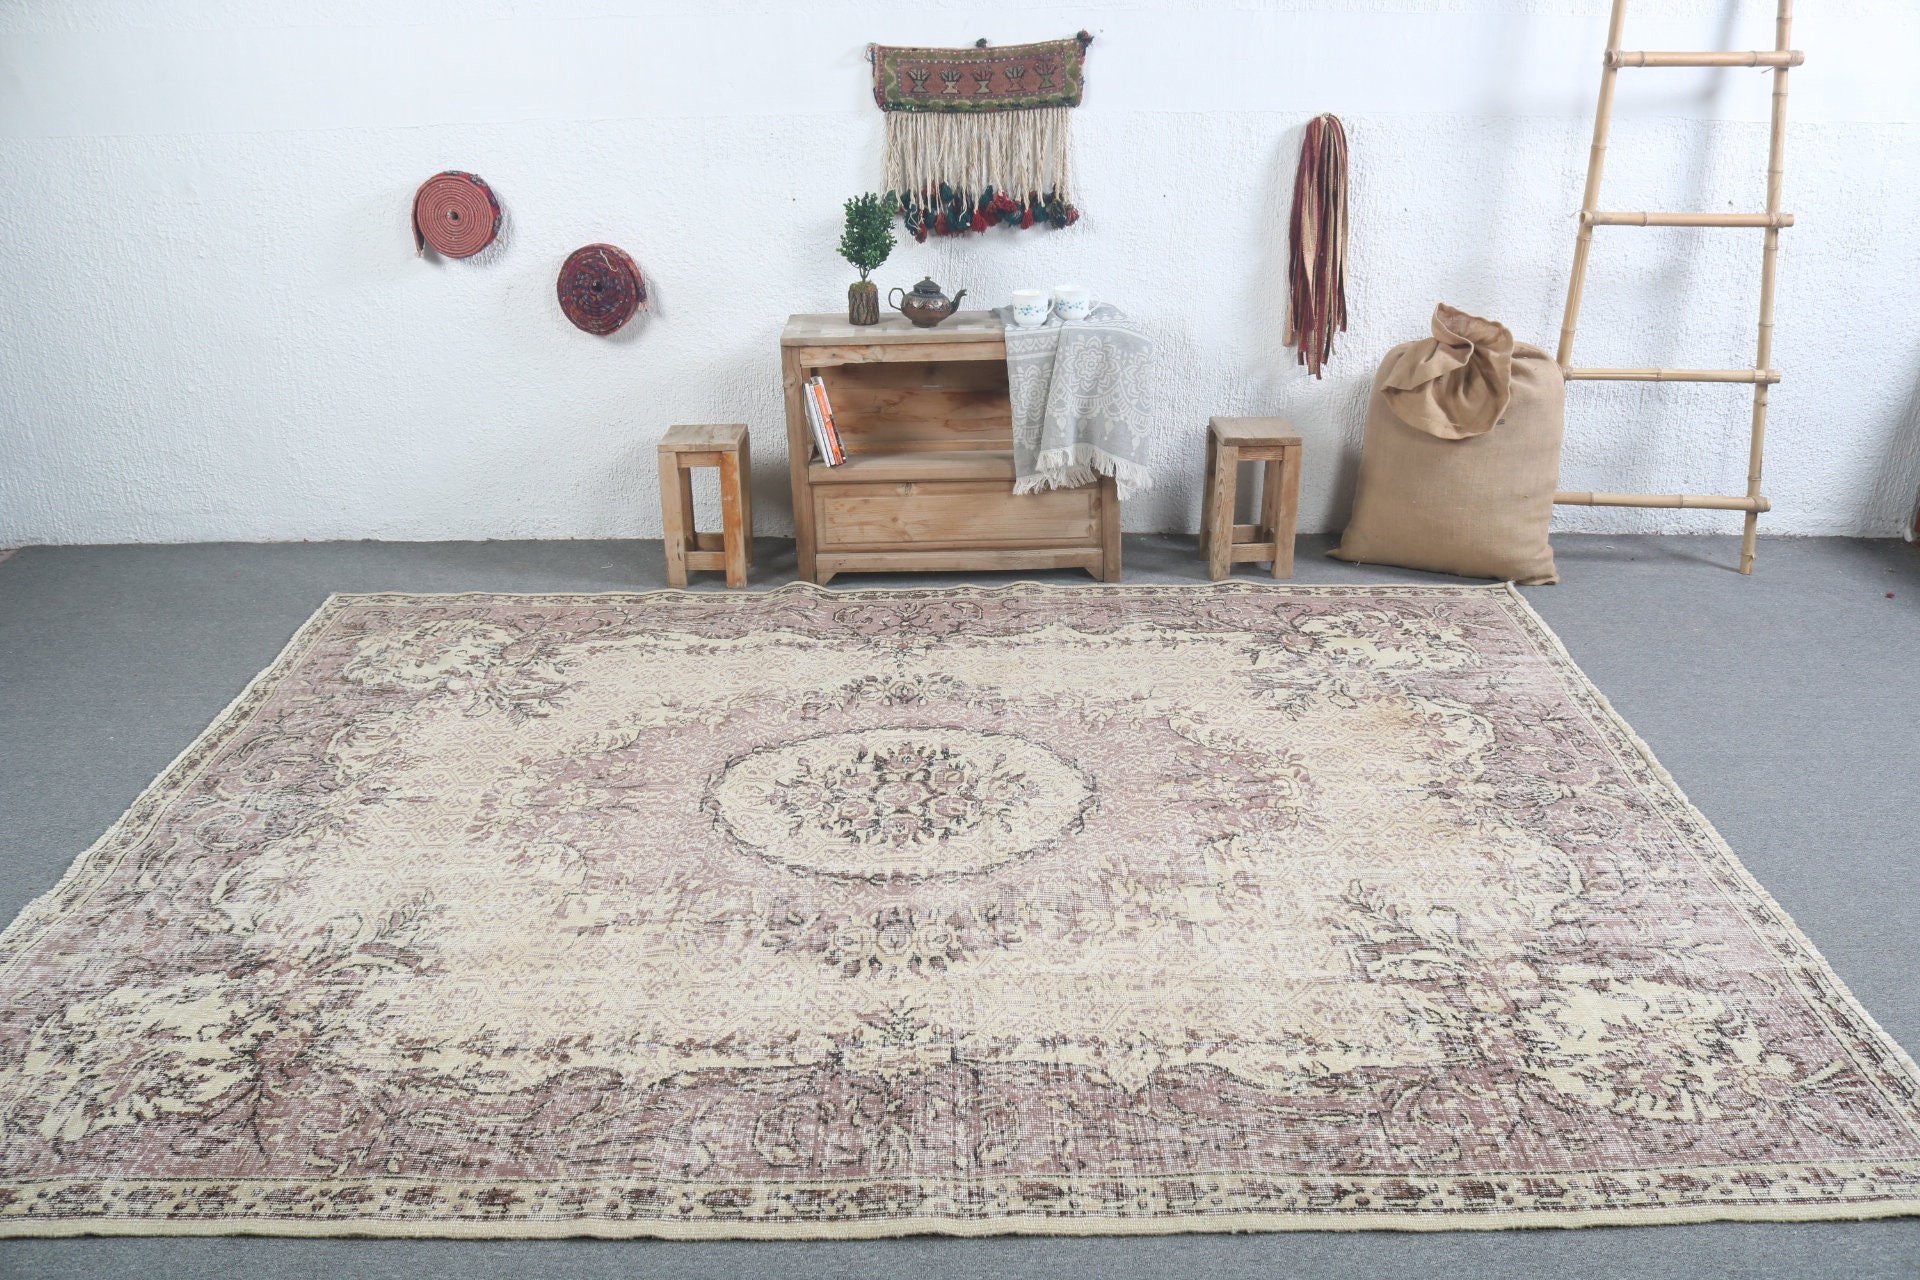 Vintage Rugs, Rugs for Salon, Living Room Rugs, Oushak Rugs, Turkish Rugs, Anatolian Rugs, 7.2x9.4 ft Large Rugs, Art Rugs, Dining Room Rug